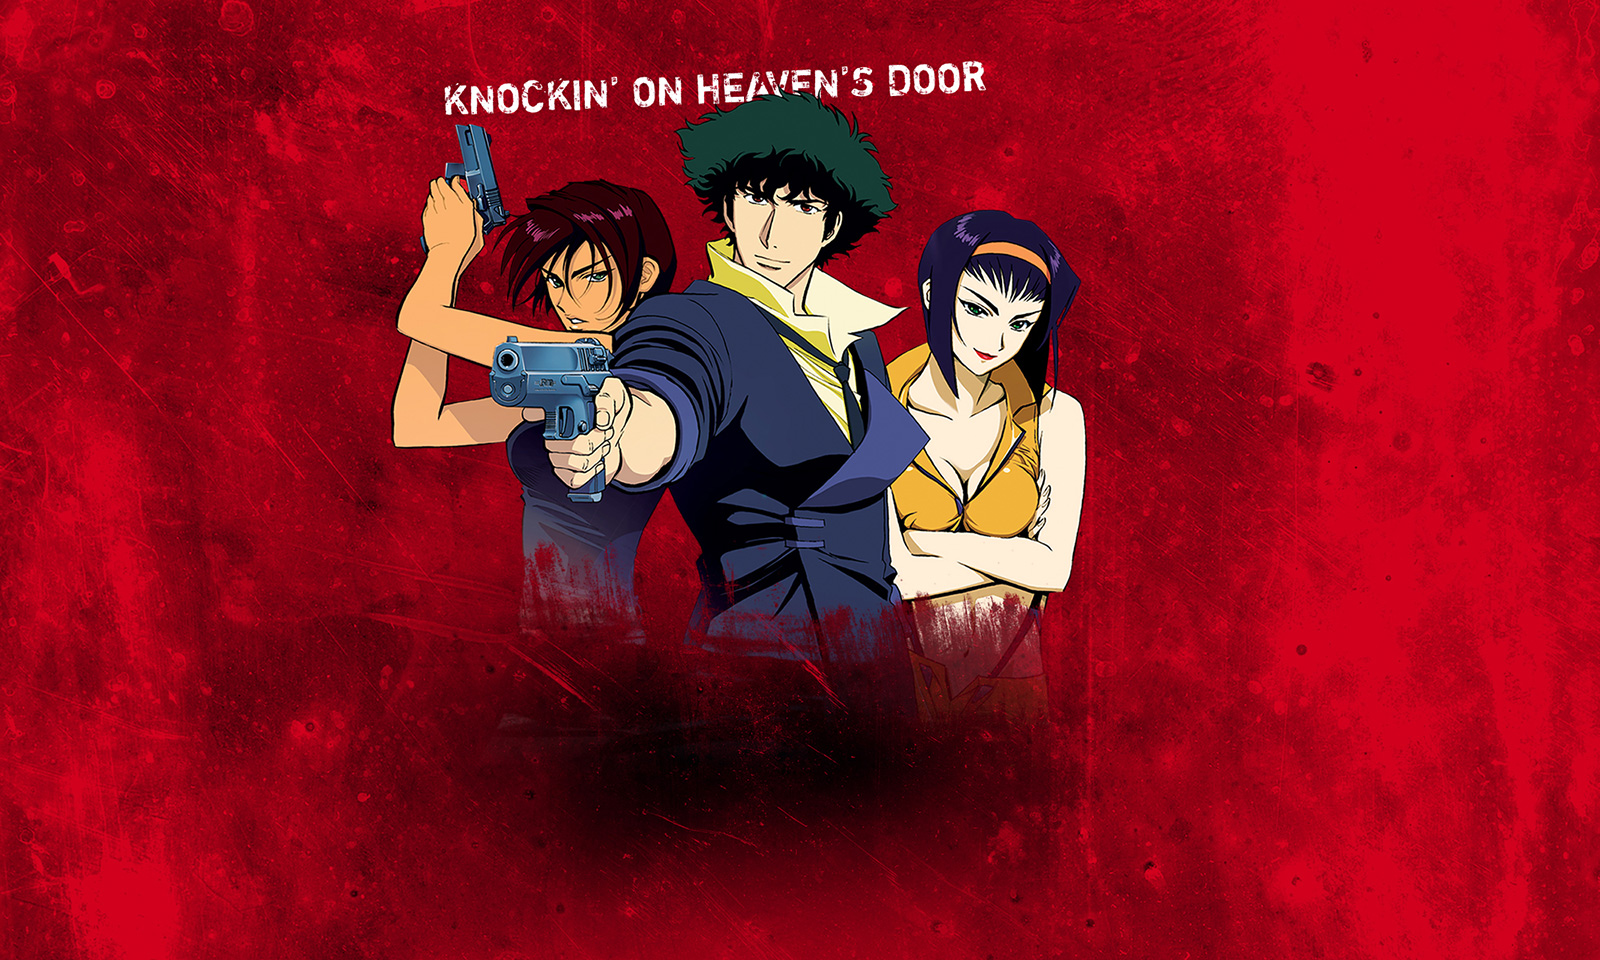 41-facts-about-the-movie-cowboy-bebop-the-movie